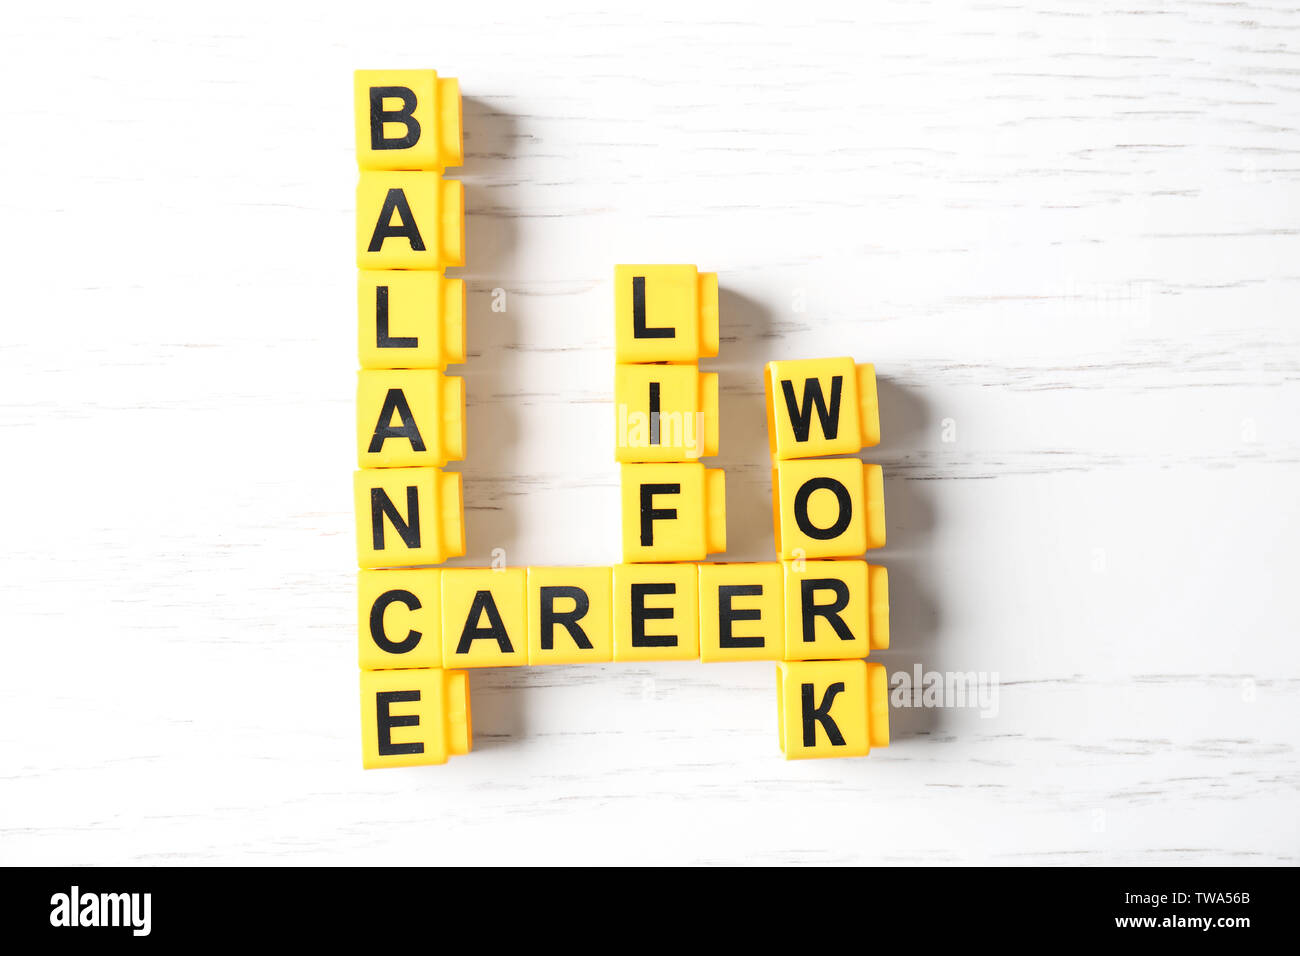 Crossword puzzle with words BALANCE LIFE WORK and CAREER on light